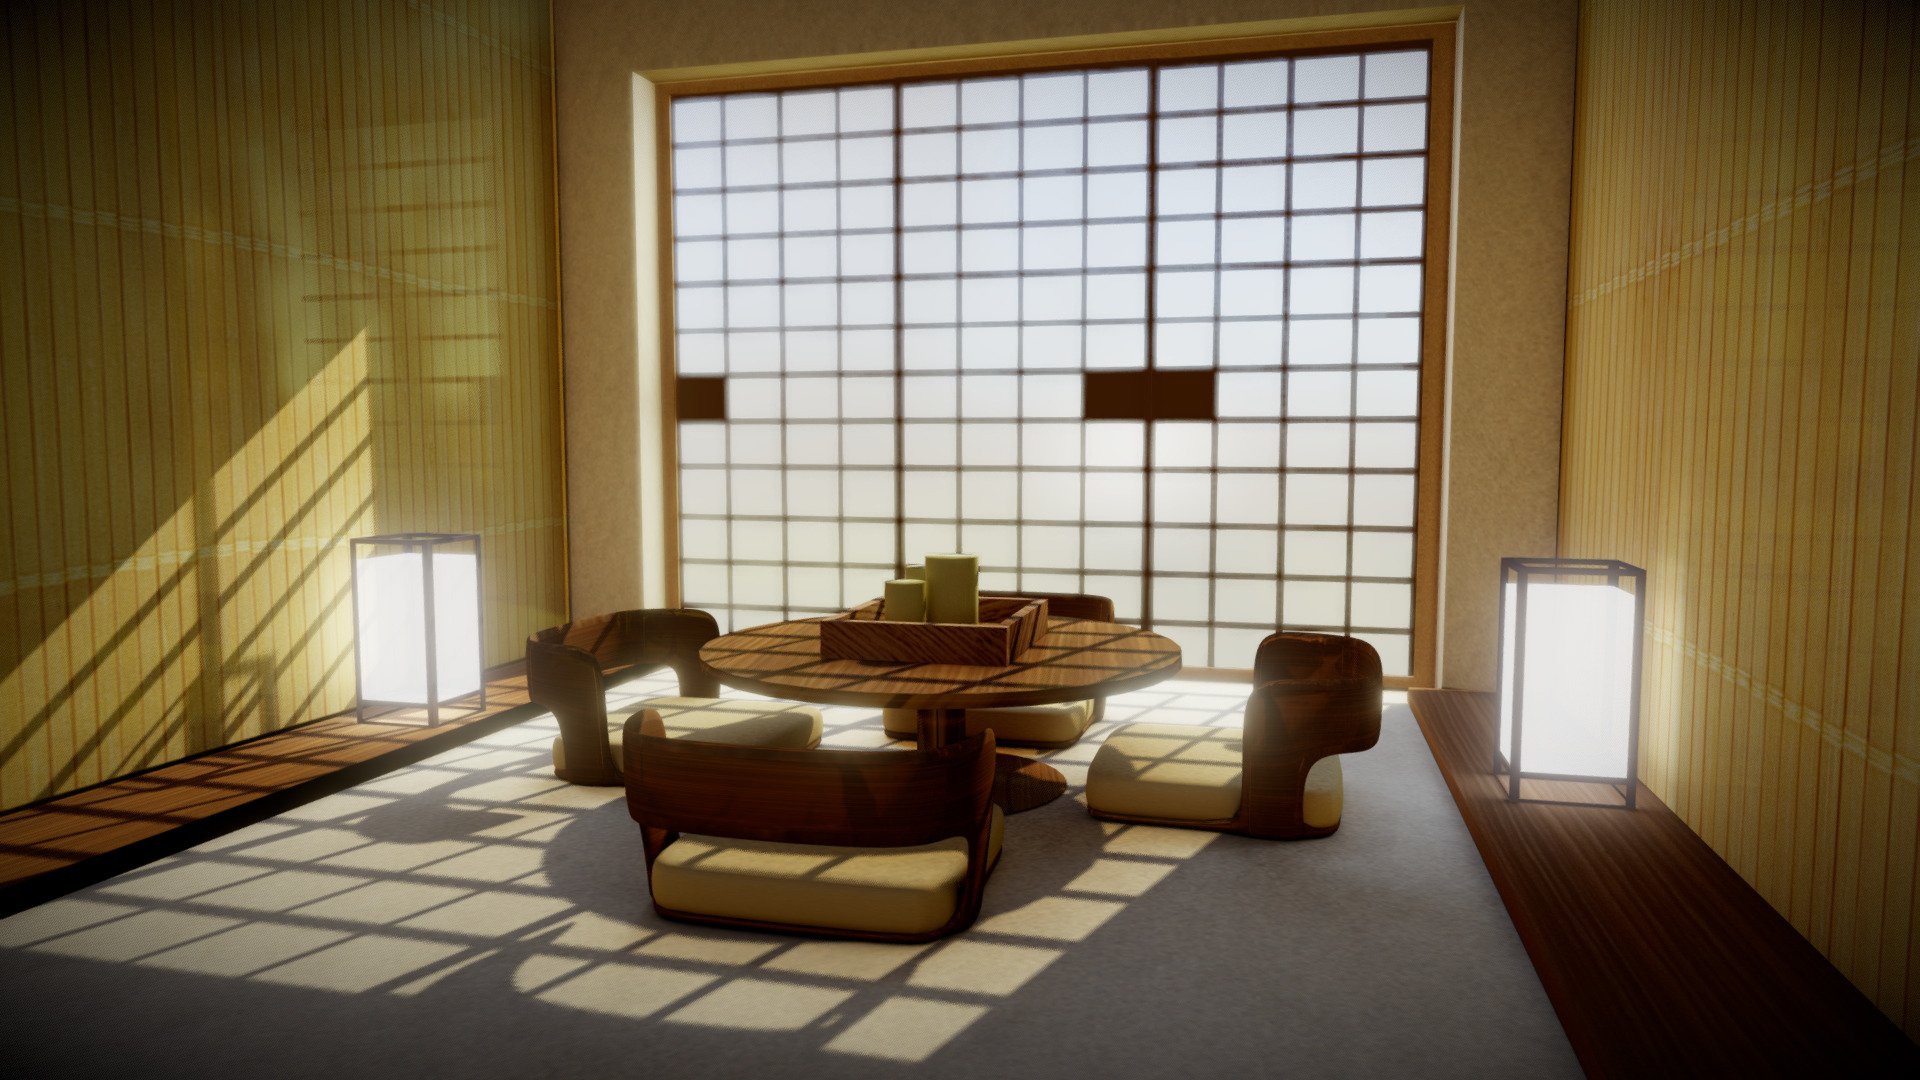 Re-paste Woods Guilty 7 Examples of How to Show Off Interiors in Your 3D Models, As Selected by  Sketchfab | ArchDaily